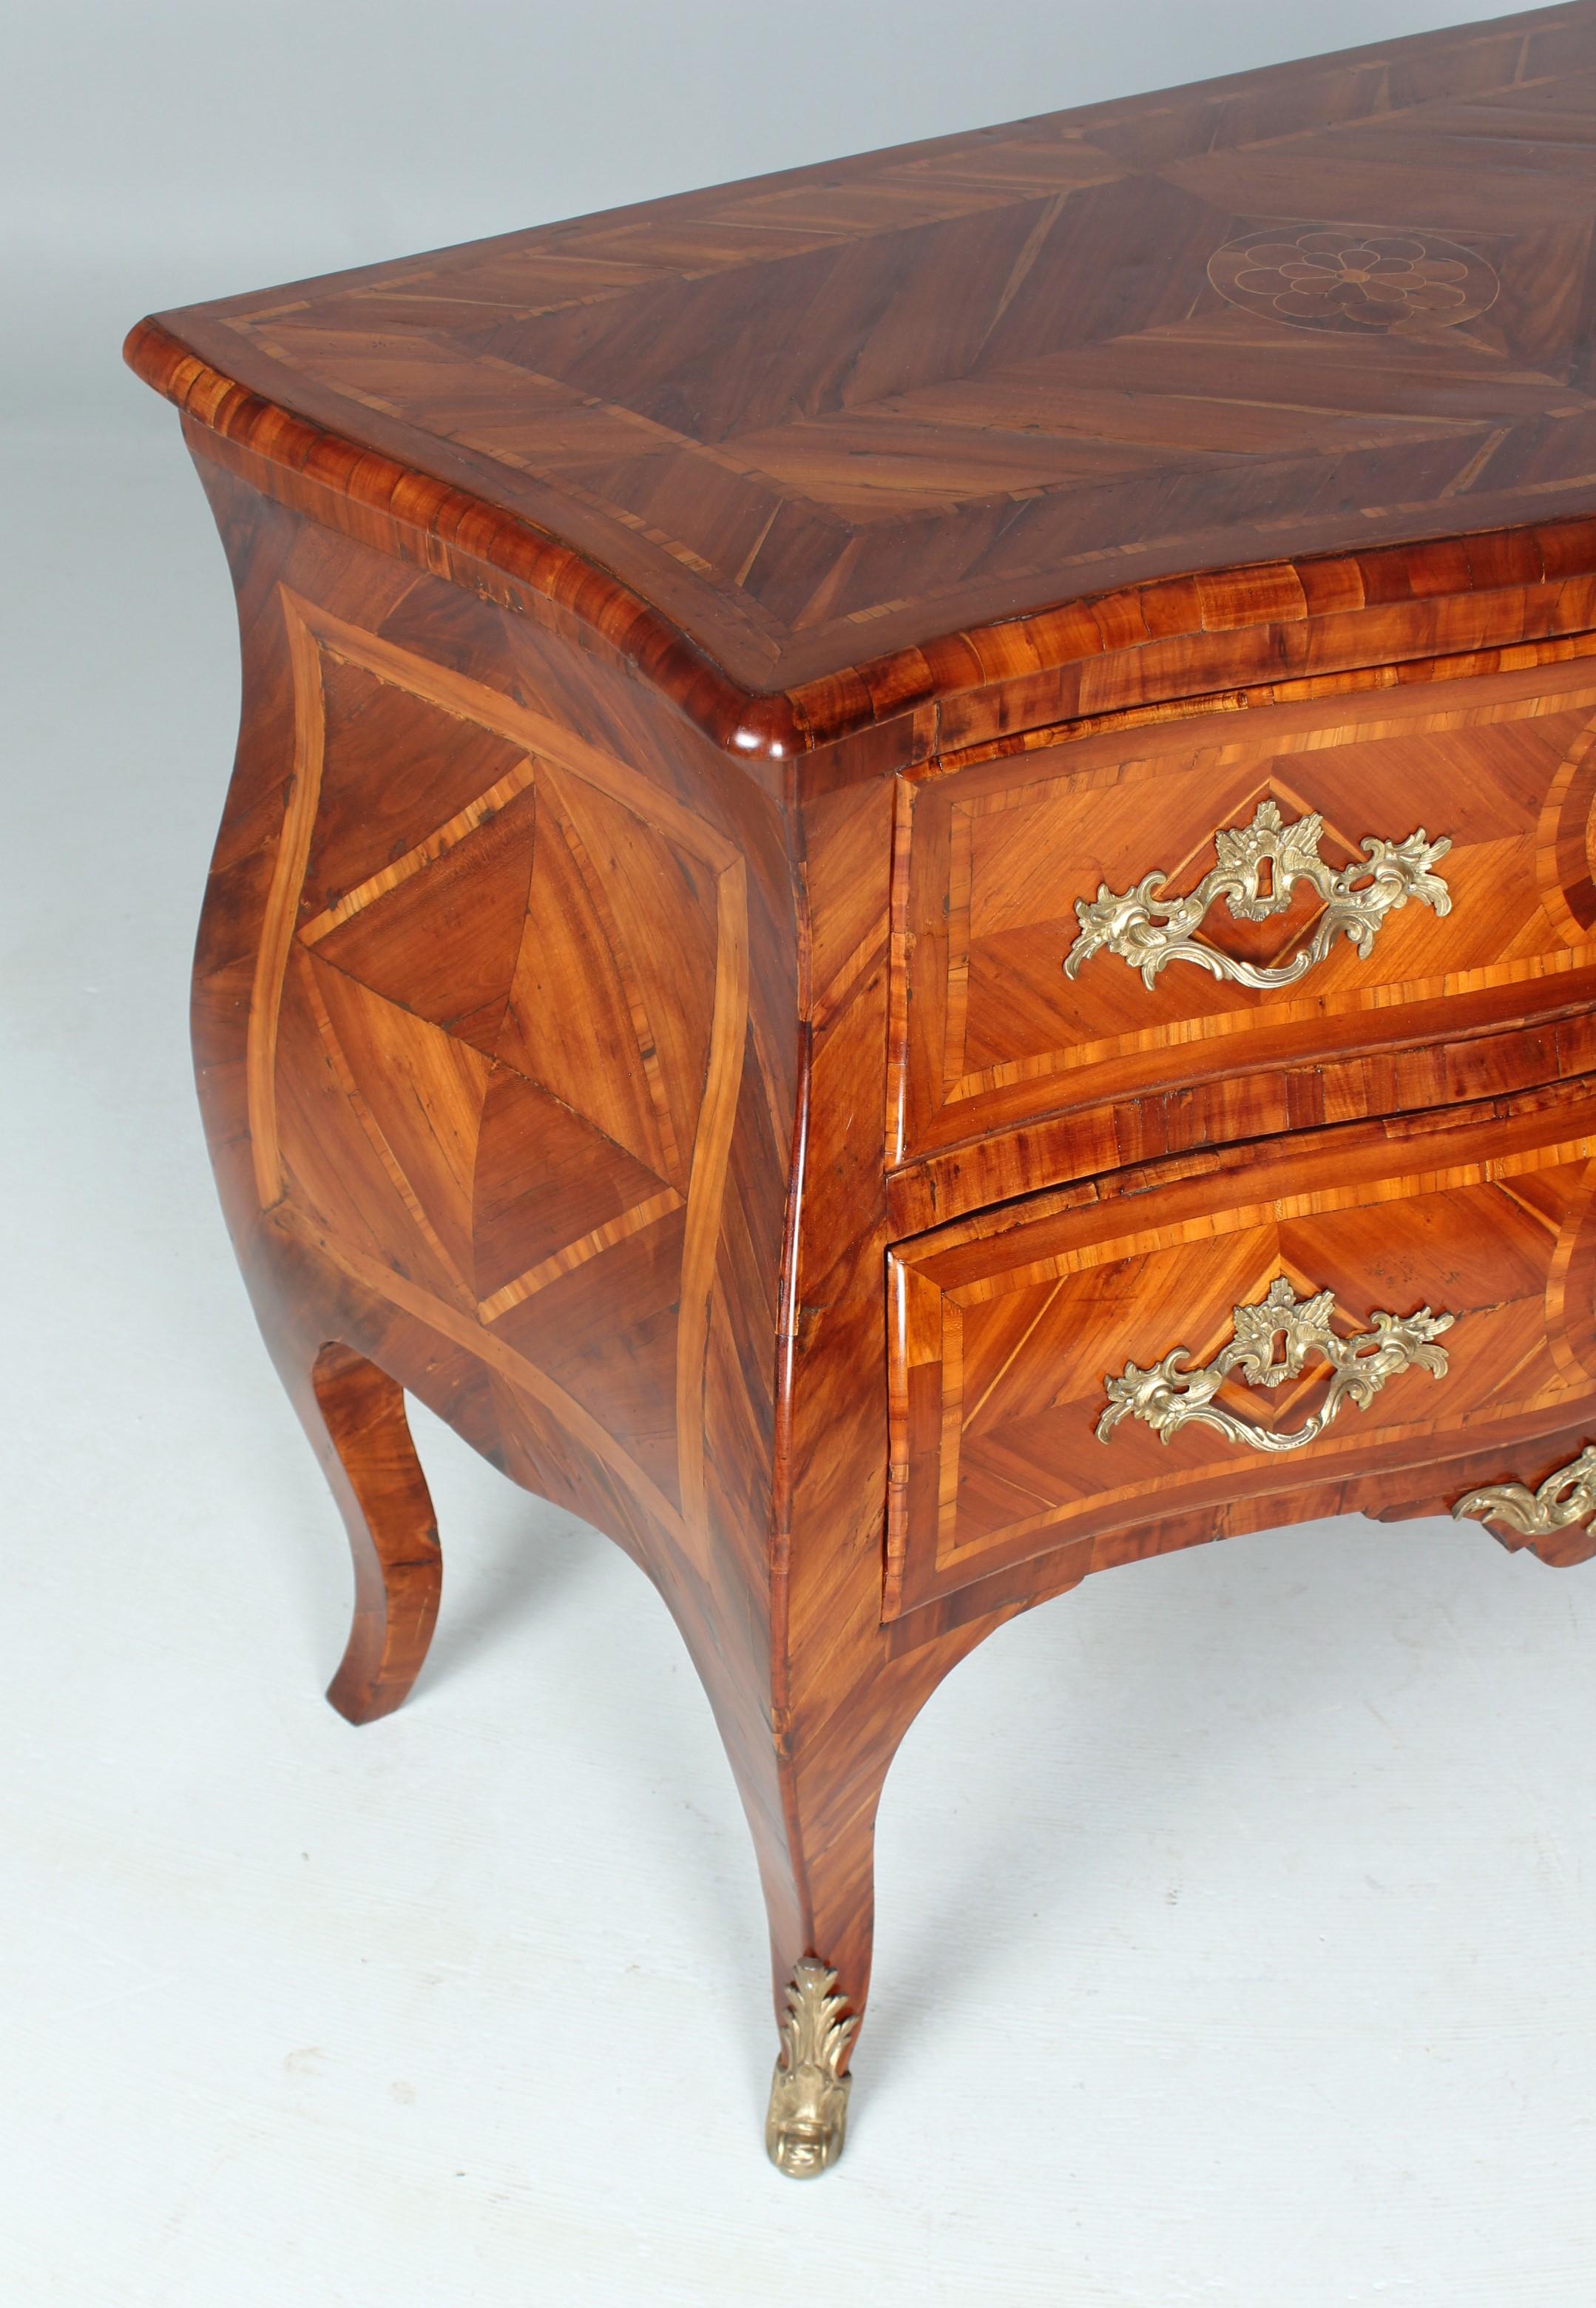 Italian baroque chest of drawers

Naples
plum wood (?)
Baroque around 1750

Dimensions: H x W x D: 85 x 101 x 53 cm

Description:
Two-bowl piece of furniture standing on curved legs.
All sides curved and cambered corpus. Veneered in plum